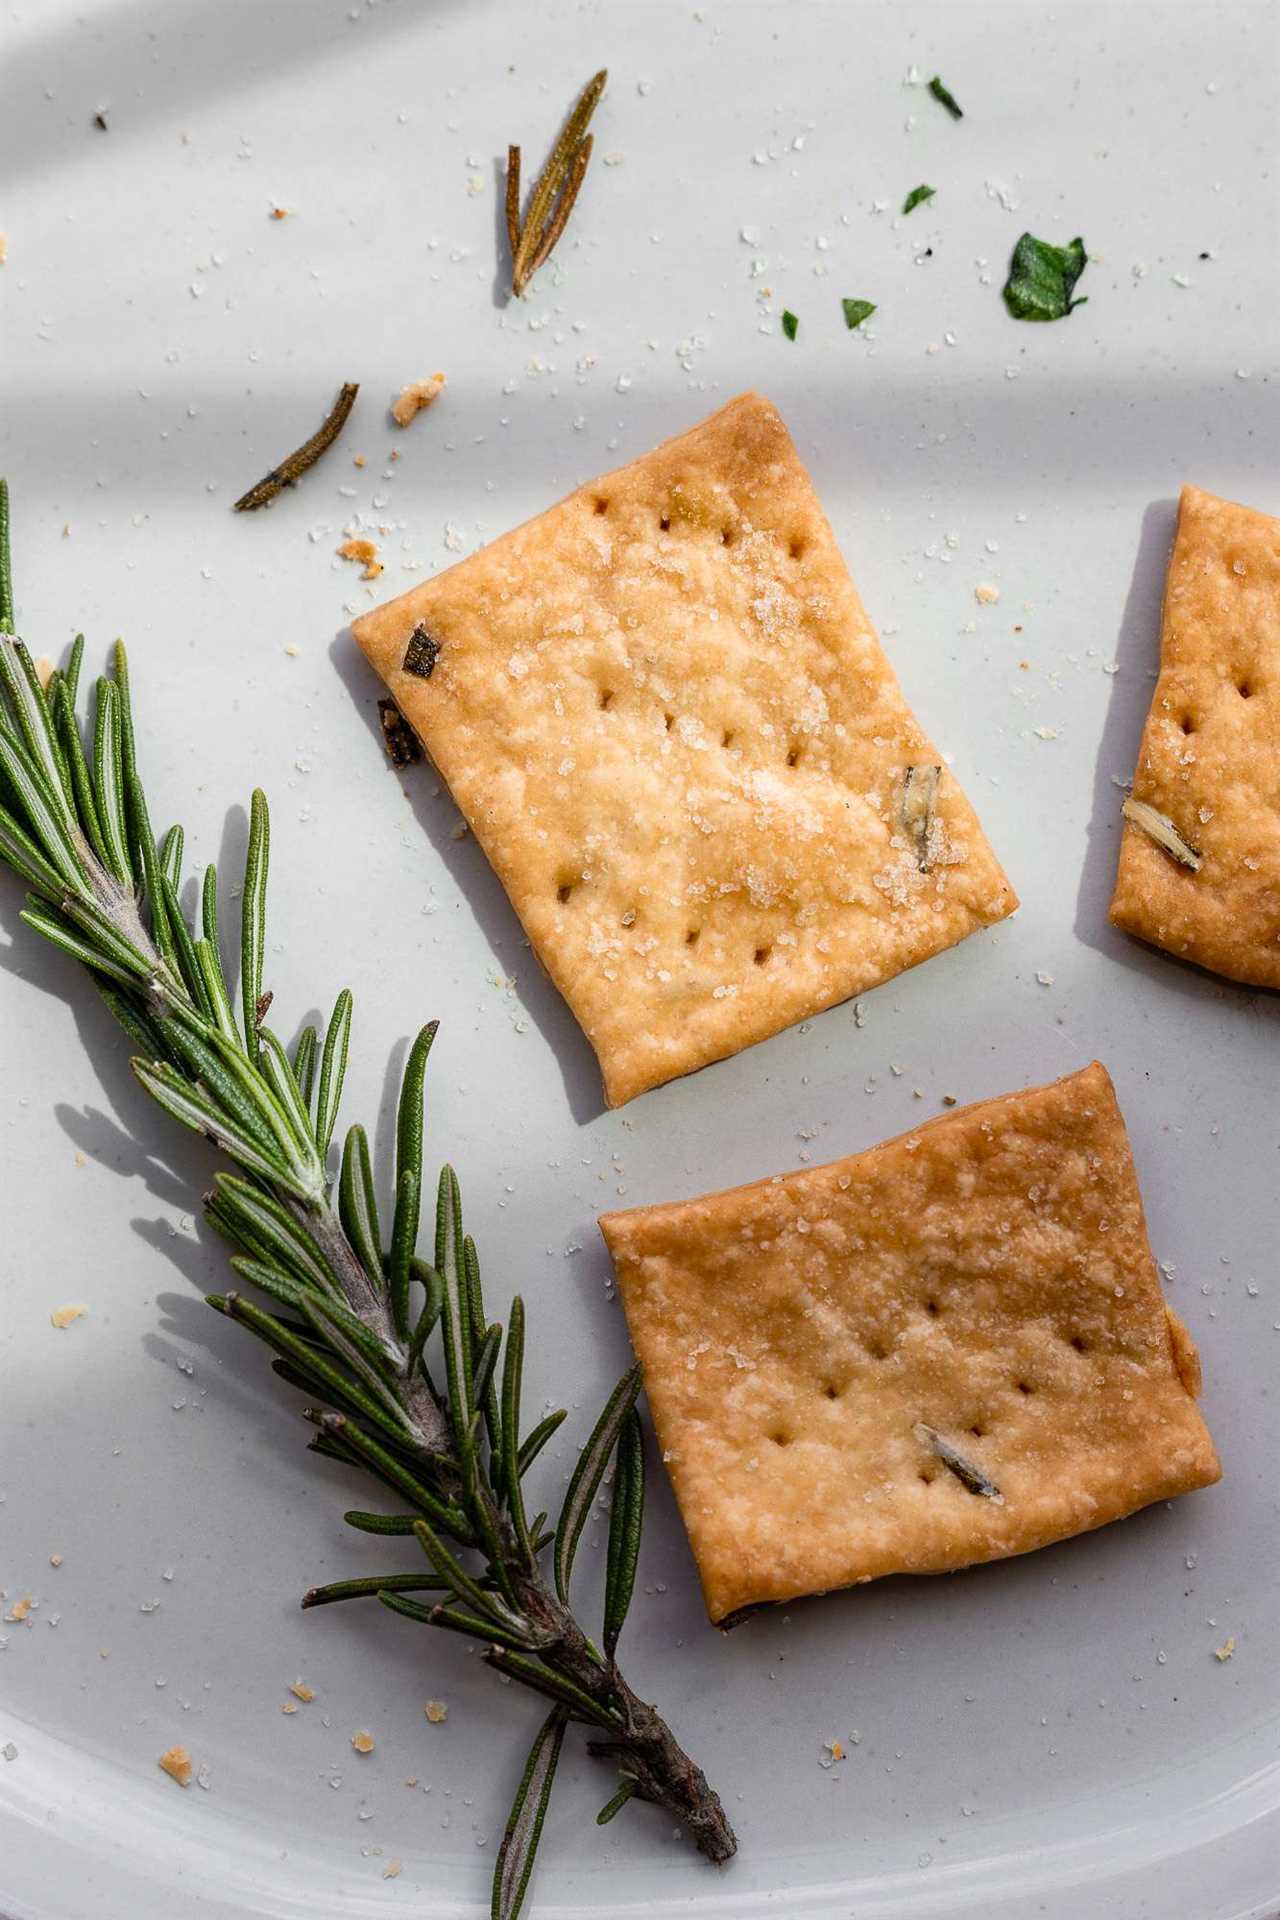 one crispy baked sourdough cracker on a plate next to fresh rosemary. Light hits the cracker to show textured sea salt and rosemary baked into the dough. 